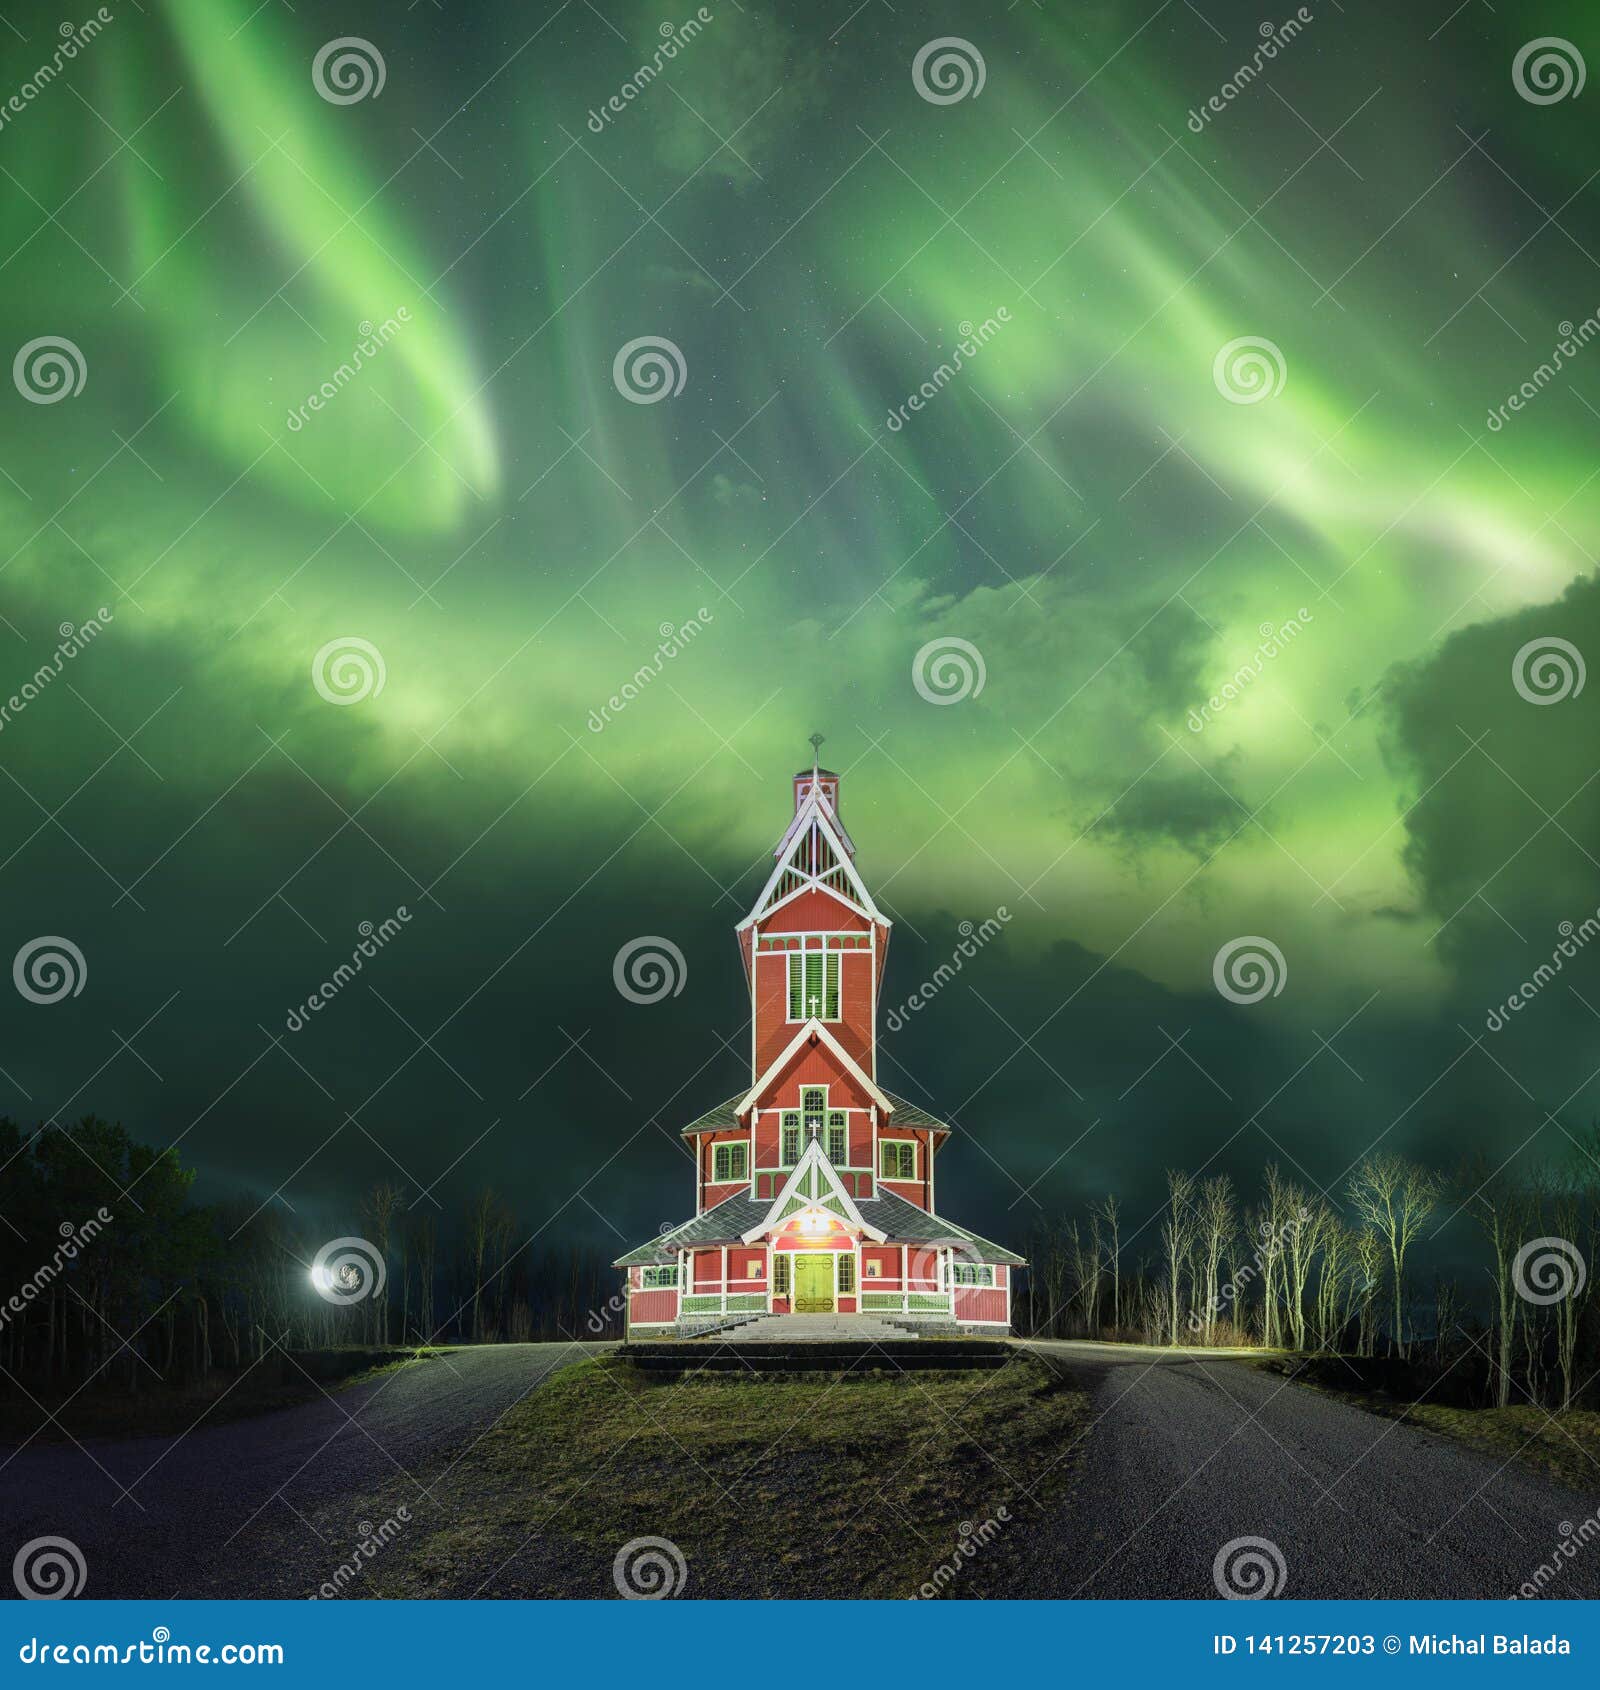 Vedligeholdelse Forskelle Måge Northern Lights in Lofoten Islands, Norway. Green Aurora Borealis. Starry  Sky with Polar Lights. Night Winter Landscape in Night. Stock Image - Image  of amazing, county: 141257203